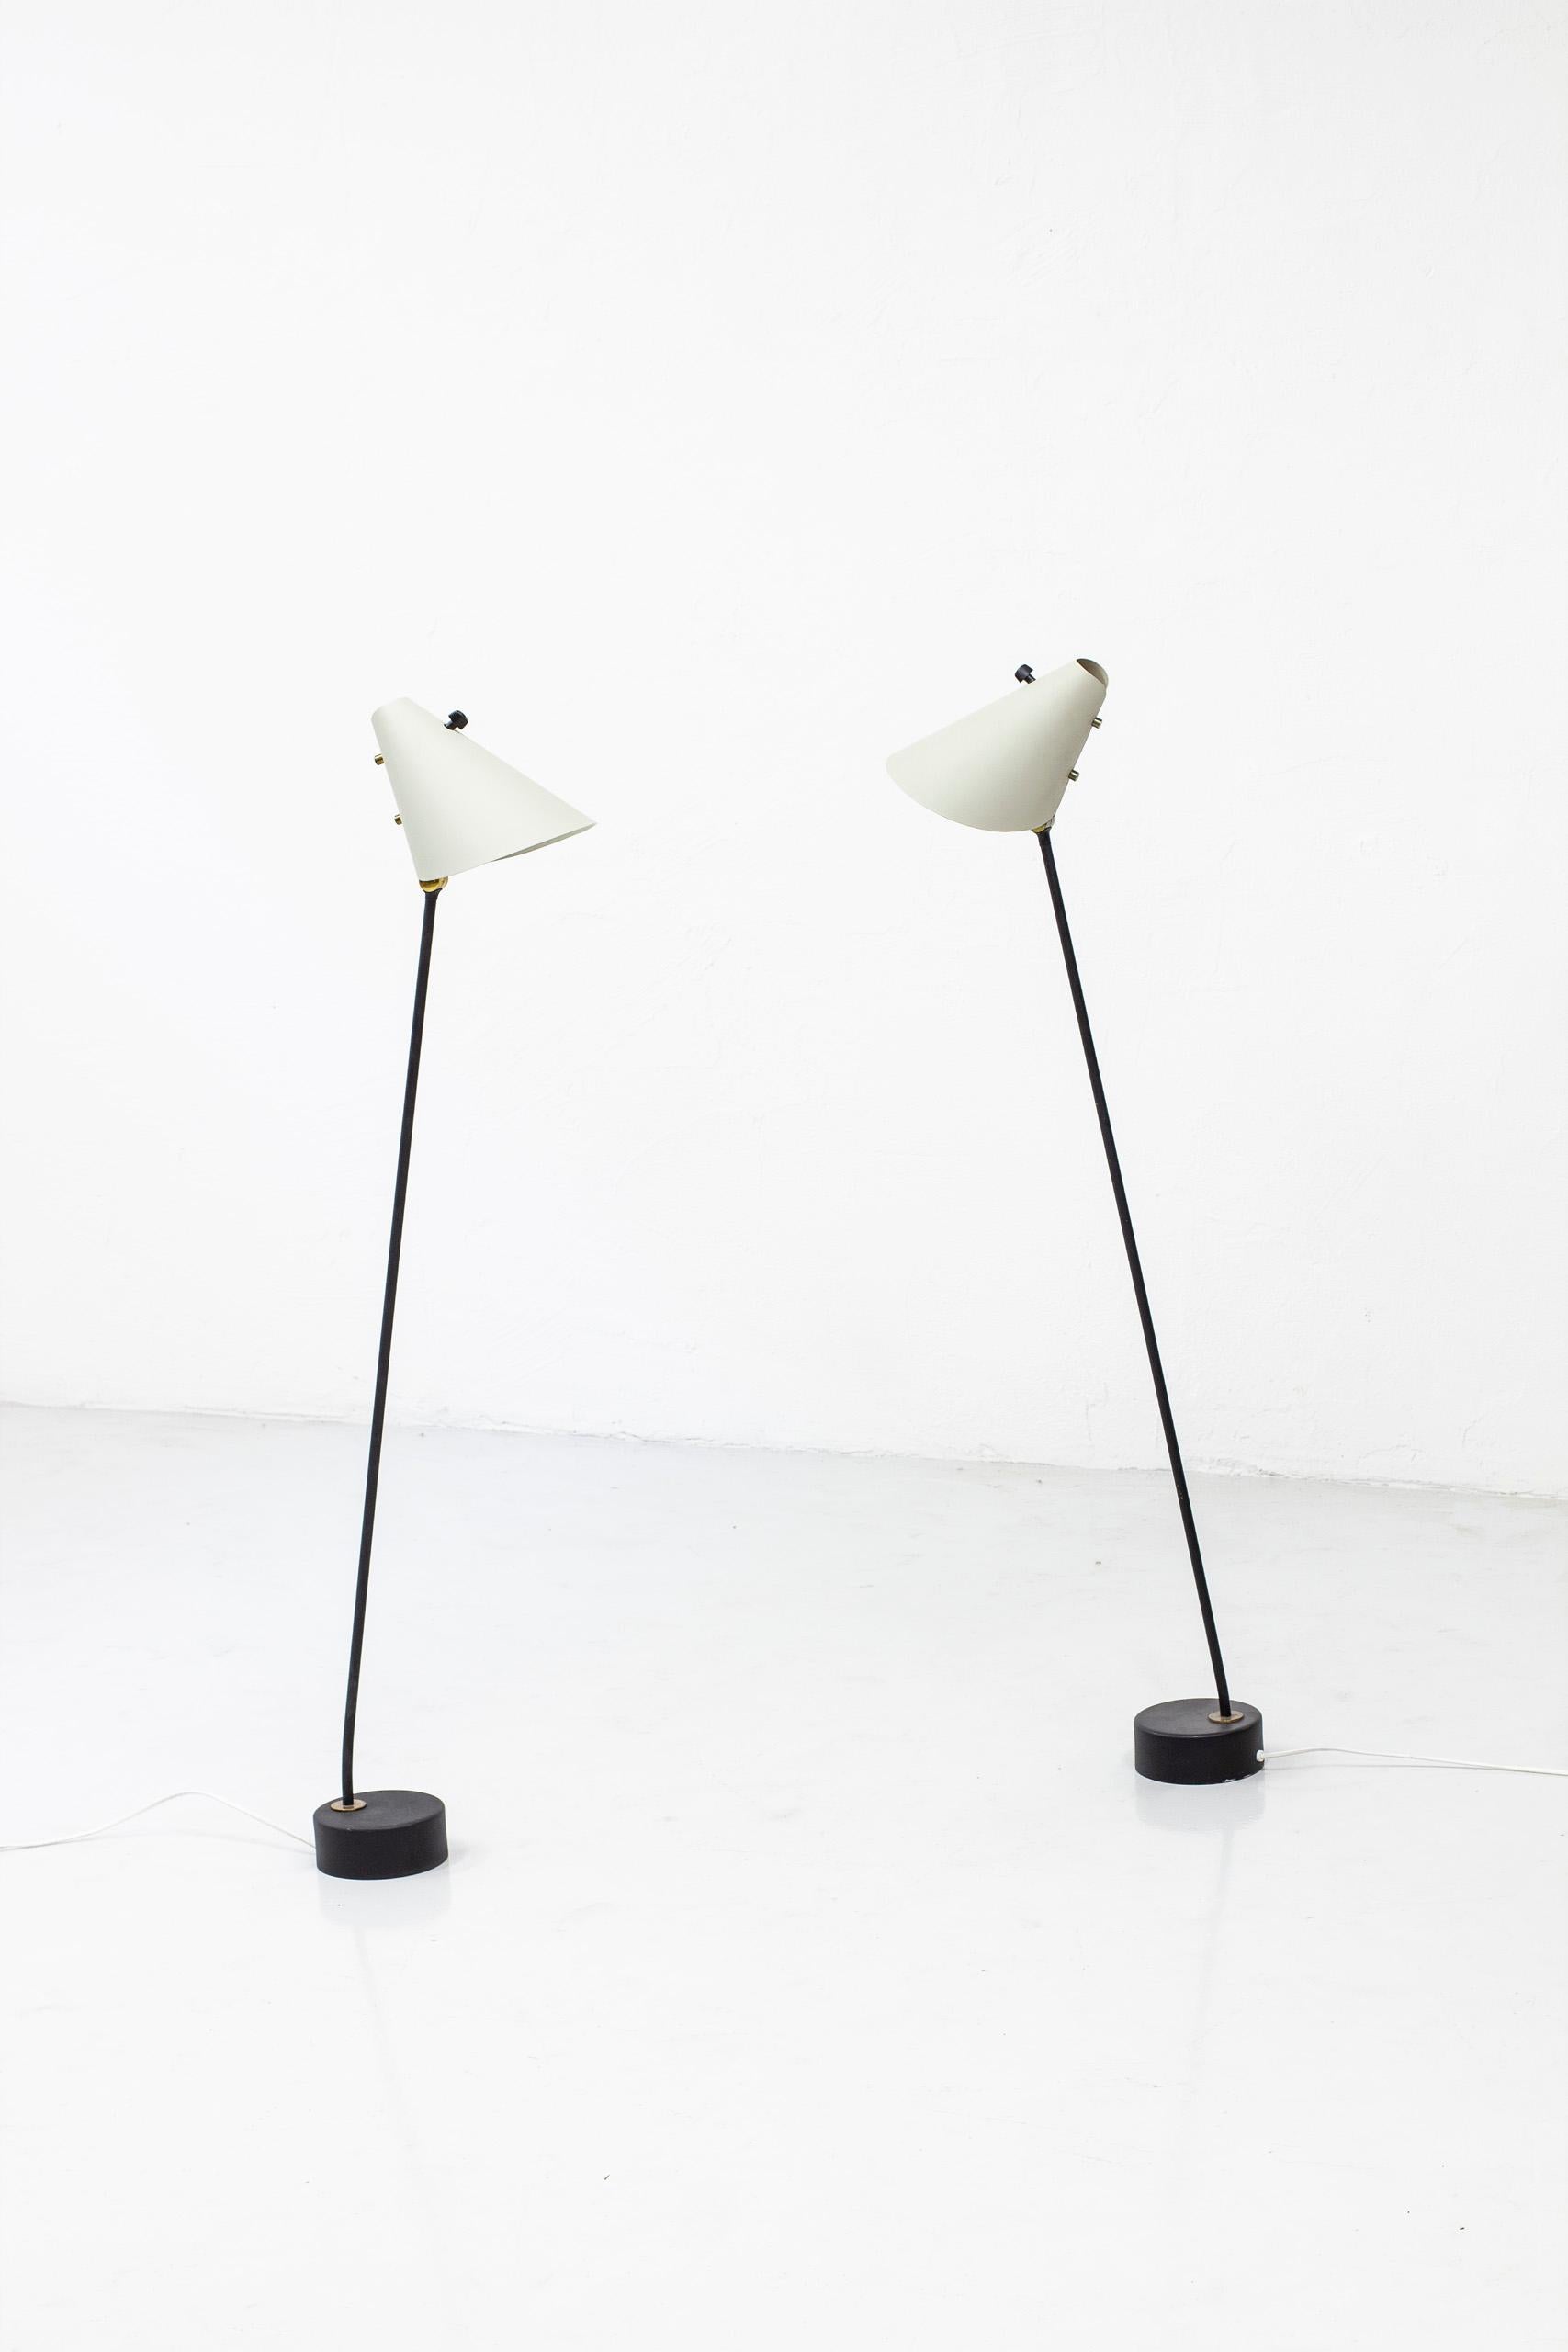 Scandinavian Modern Rare and Early Floor Lamps Designed by Hans Agne Jakobsson, 1950s